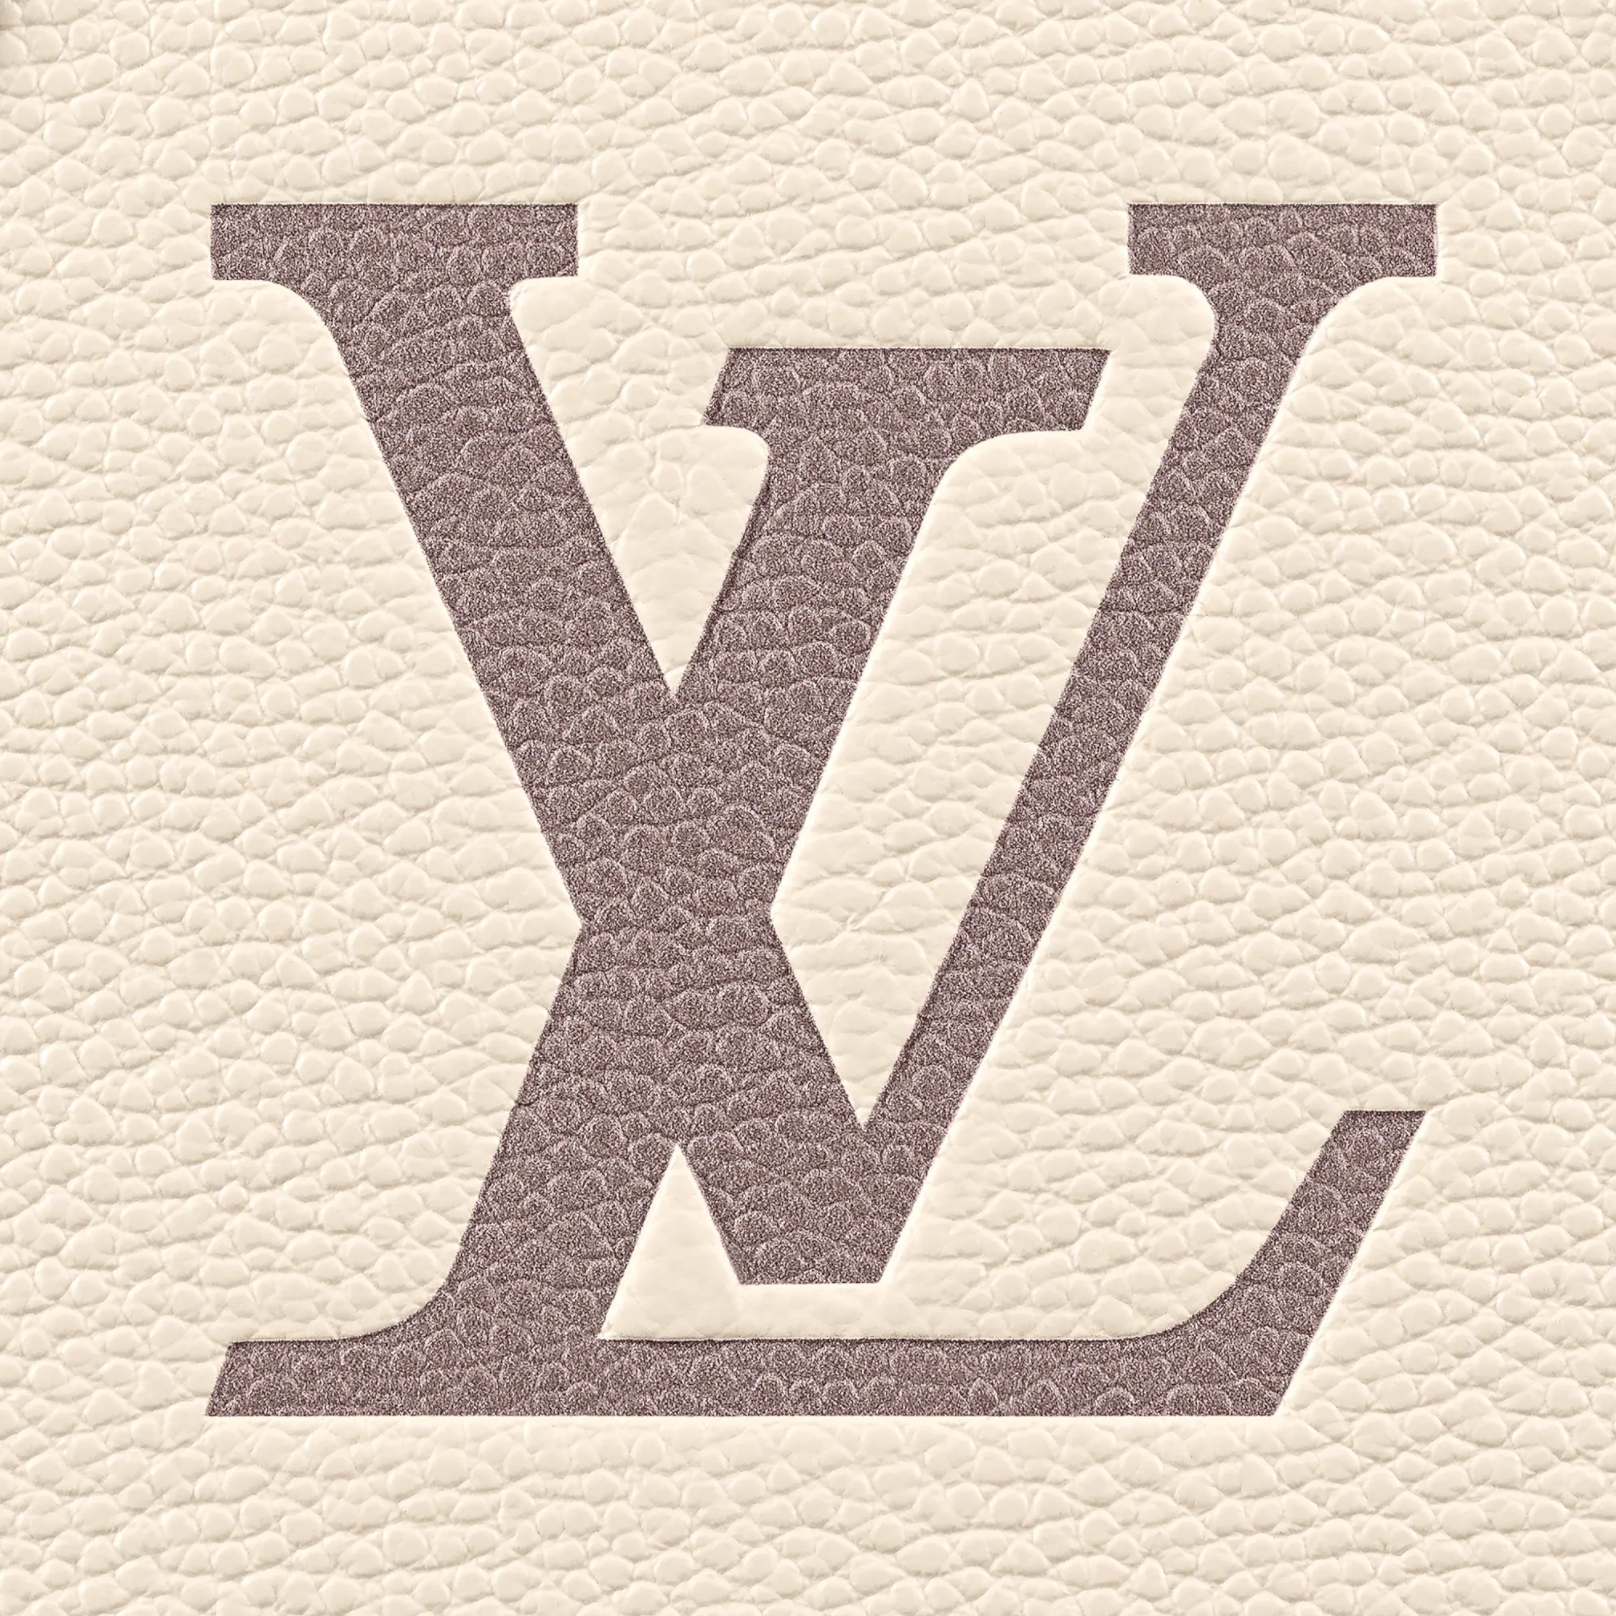 Louis Vuitton Onthego PM Creme/Bois de Rose in Cowhide Leather